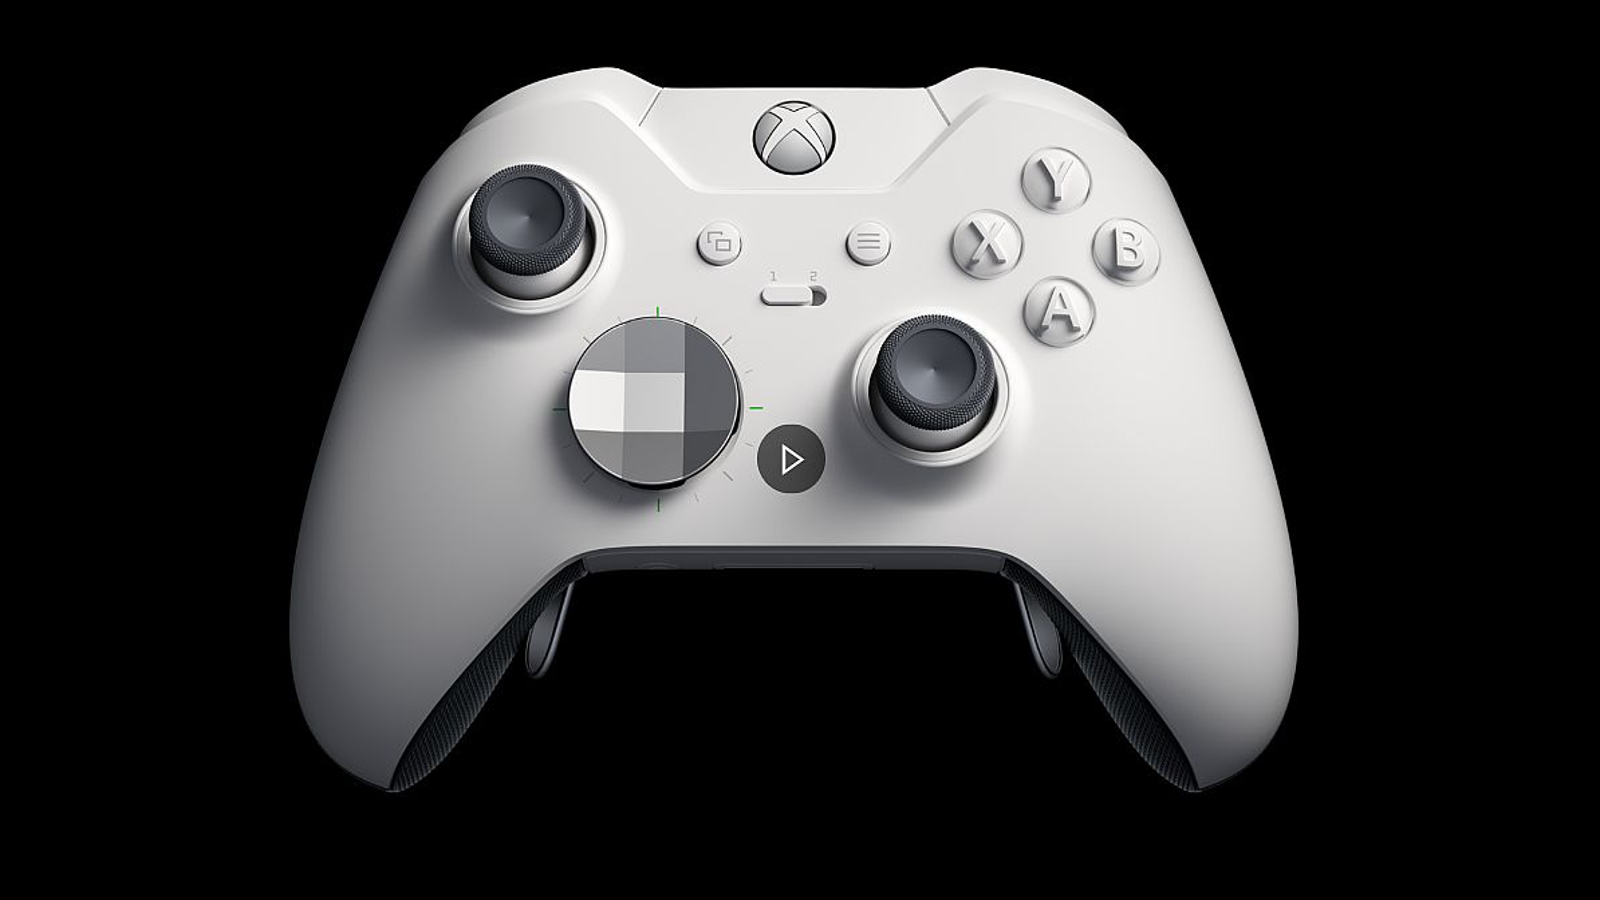 This week in games: The Xbox 360 controller's continued dominance